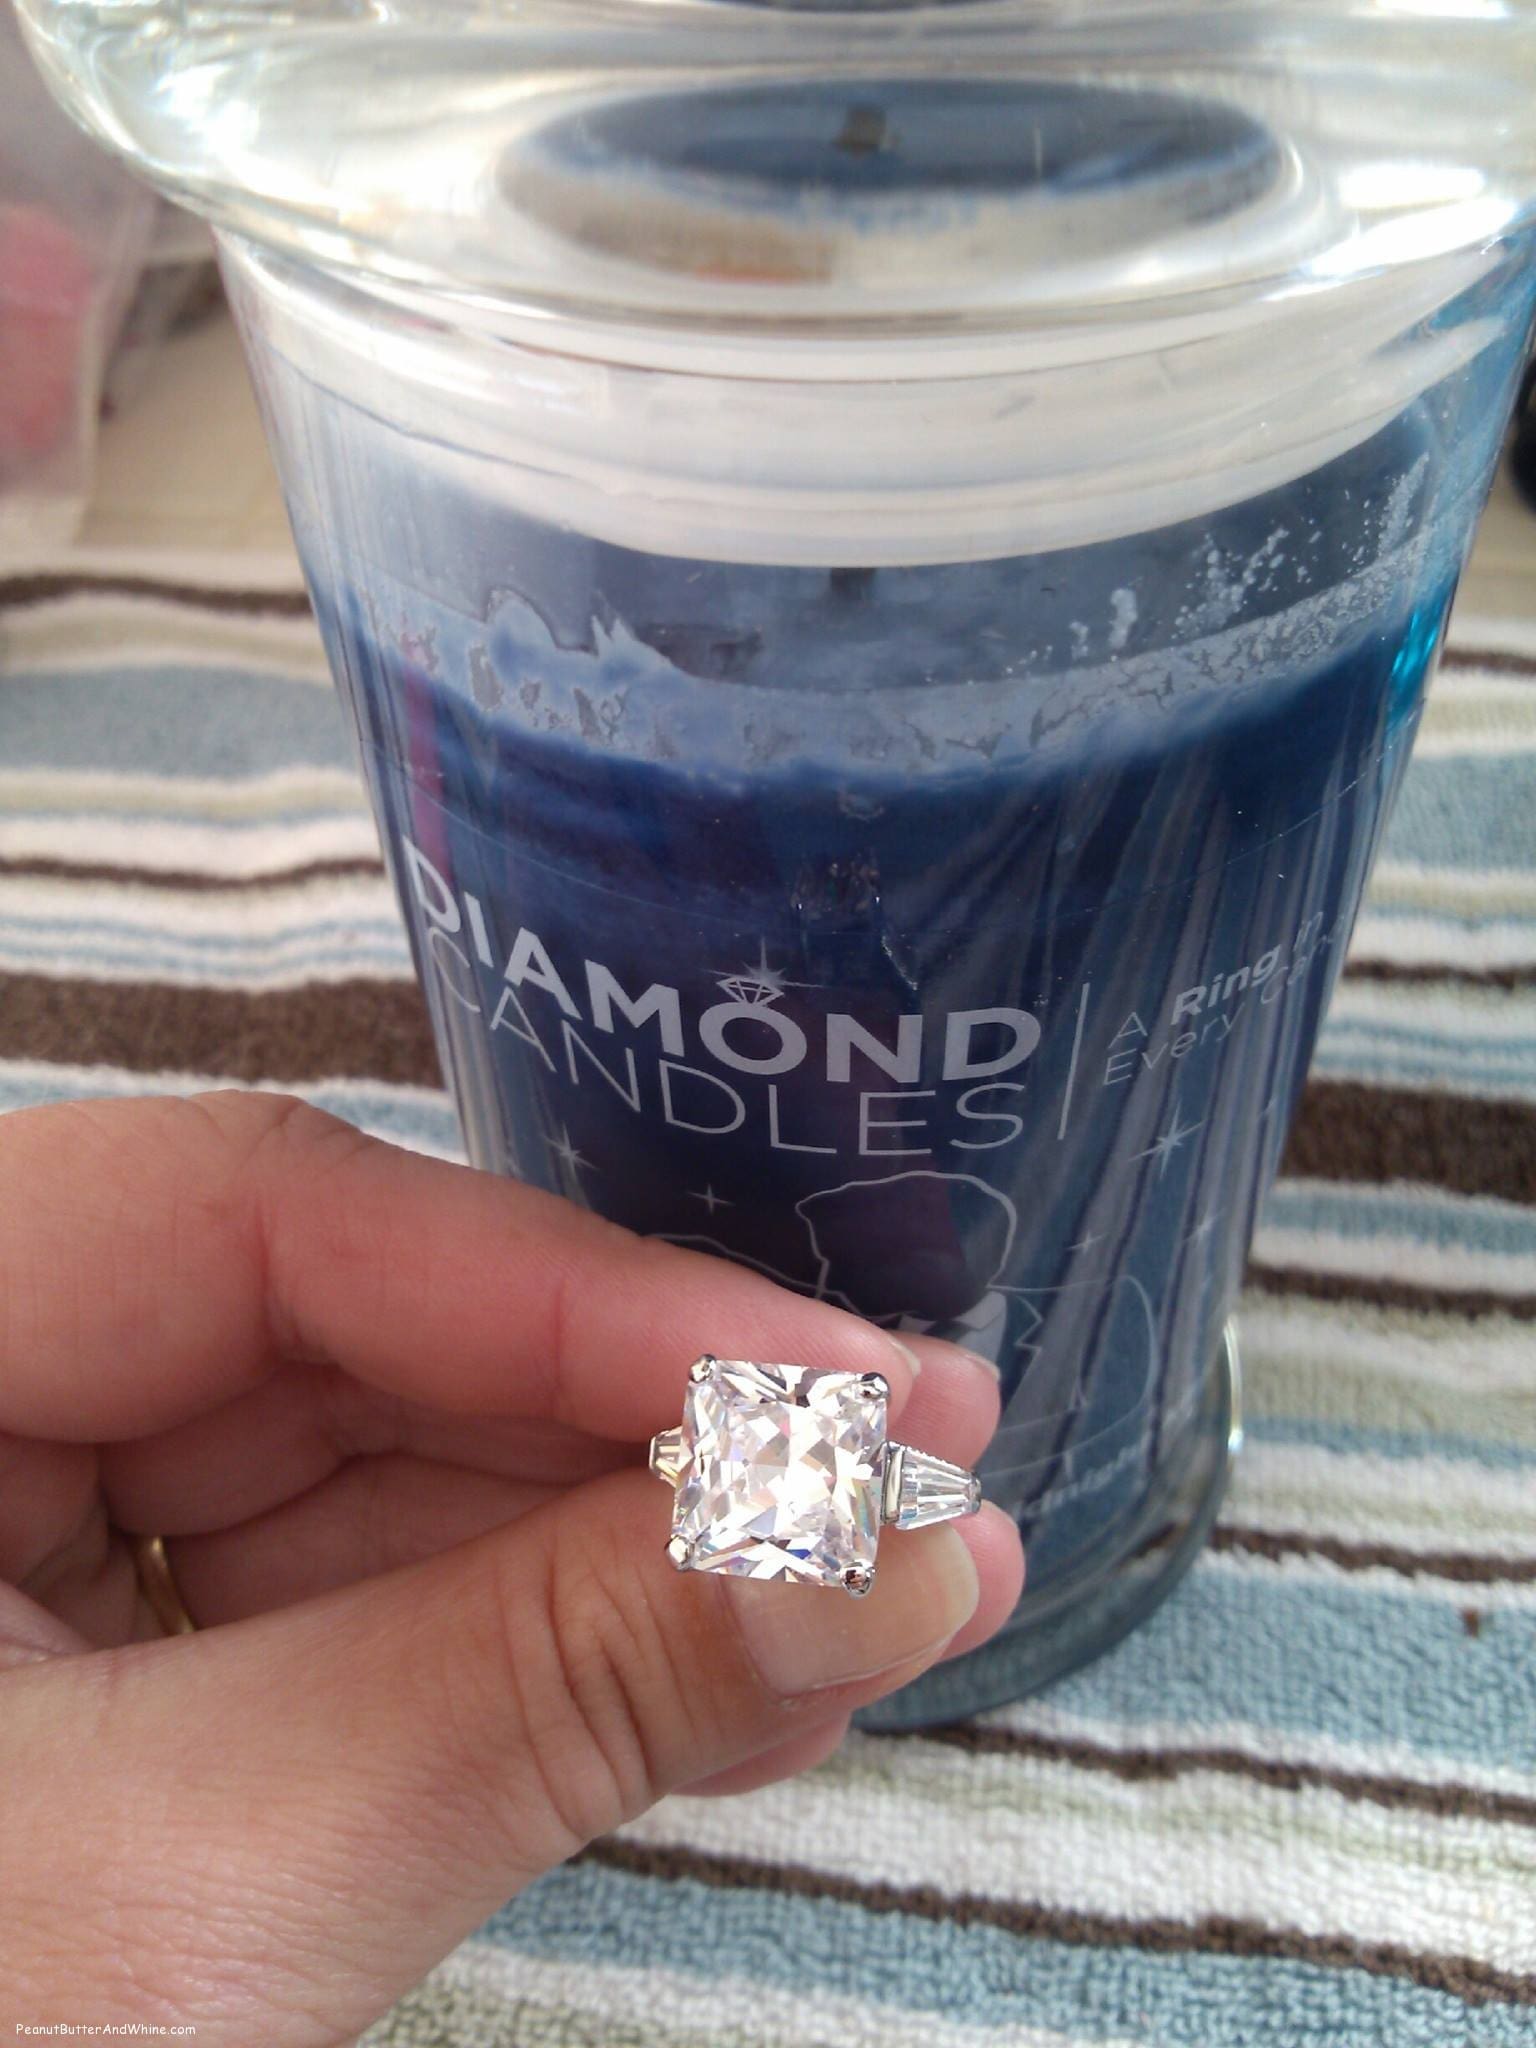 Diamond Candle Giveaway. Single Blog. Or $25 Paypal.